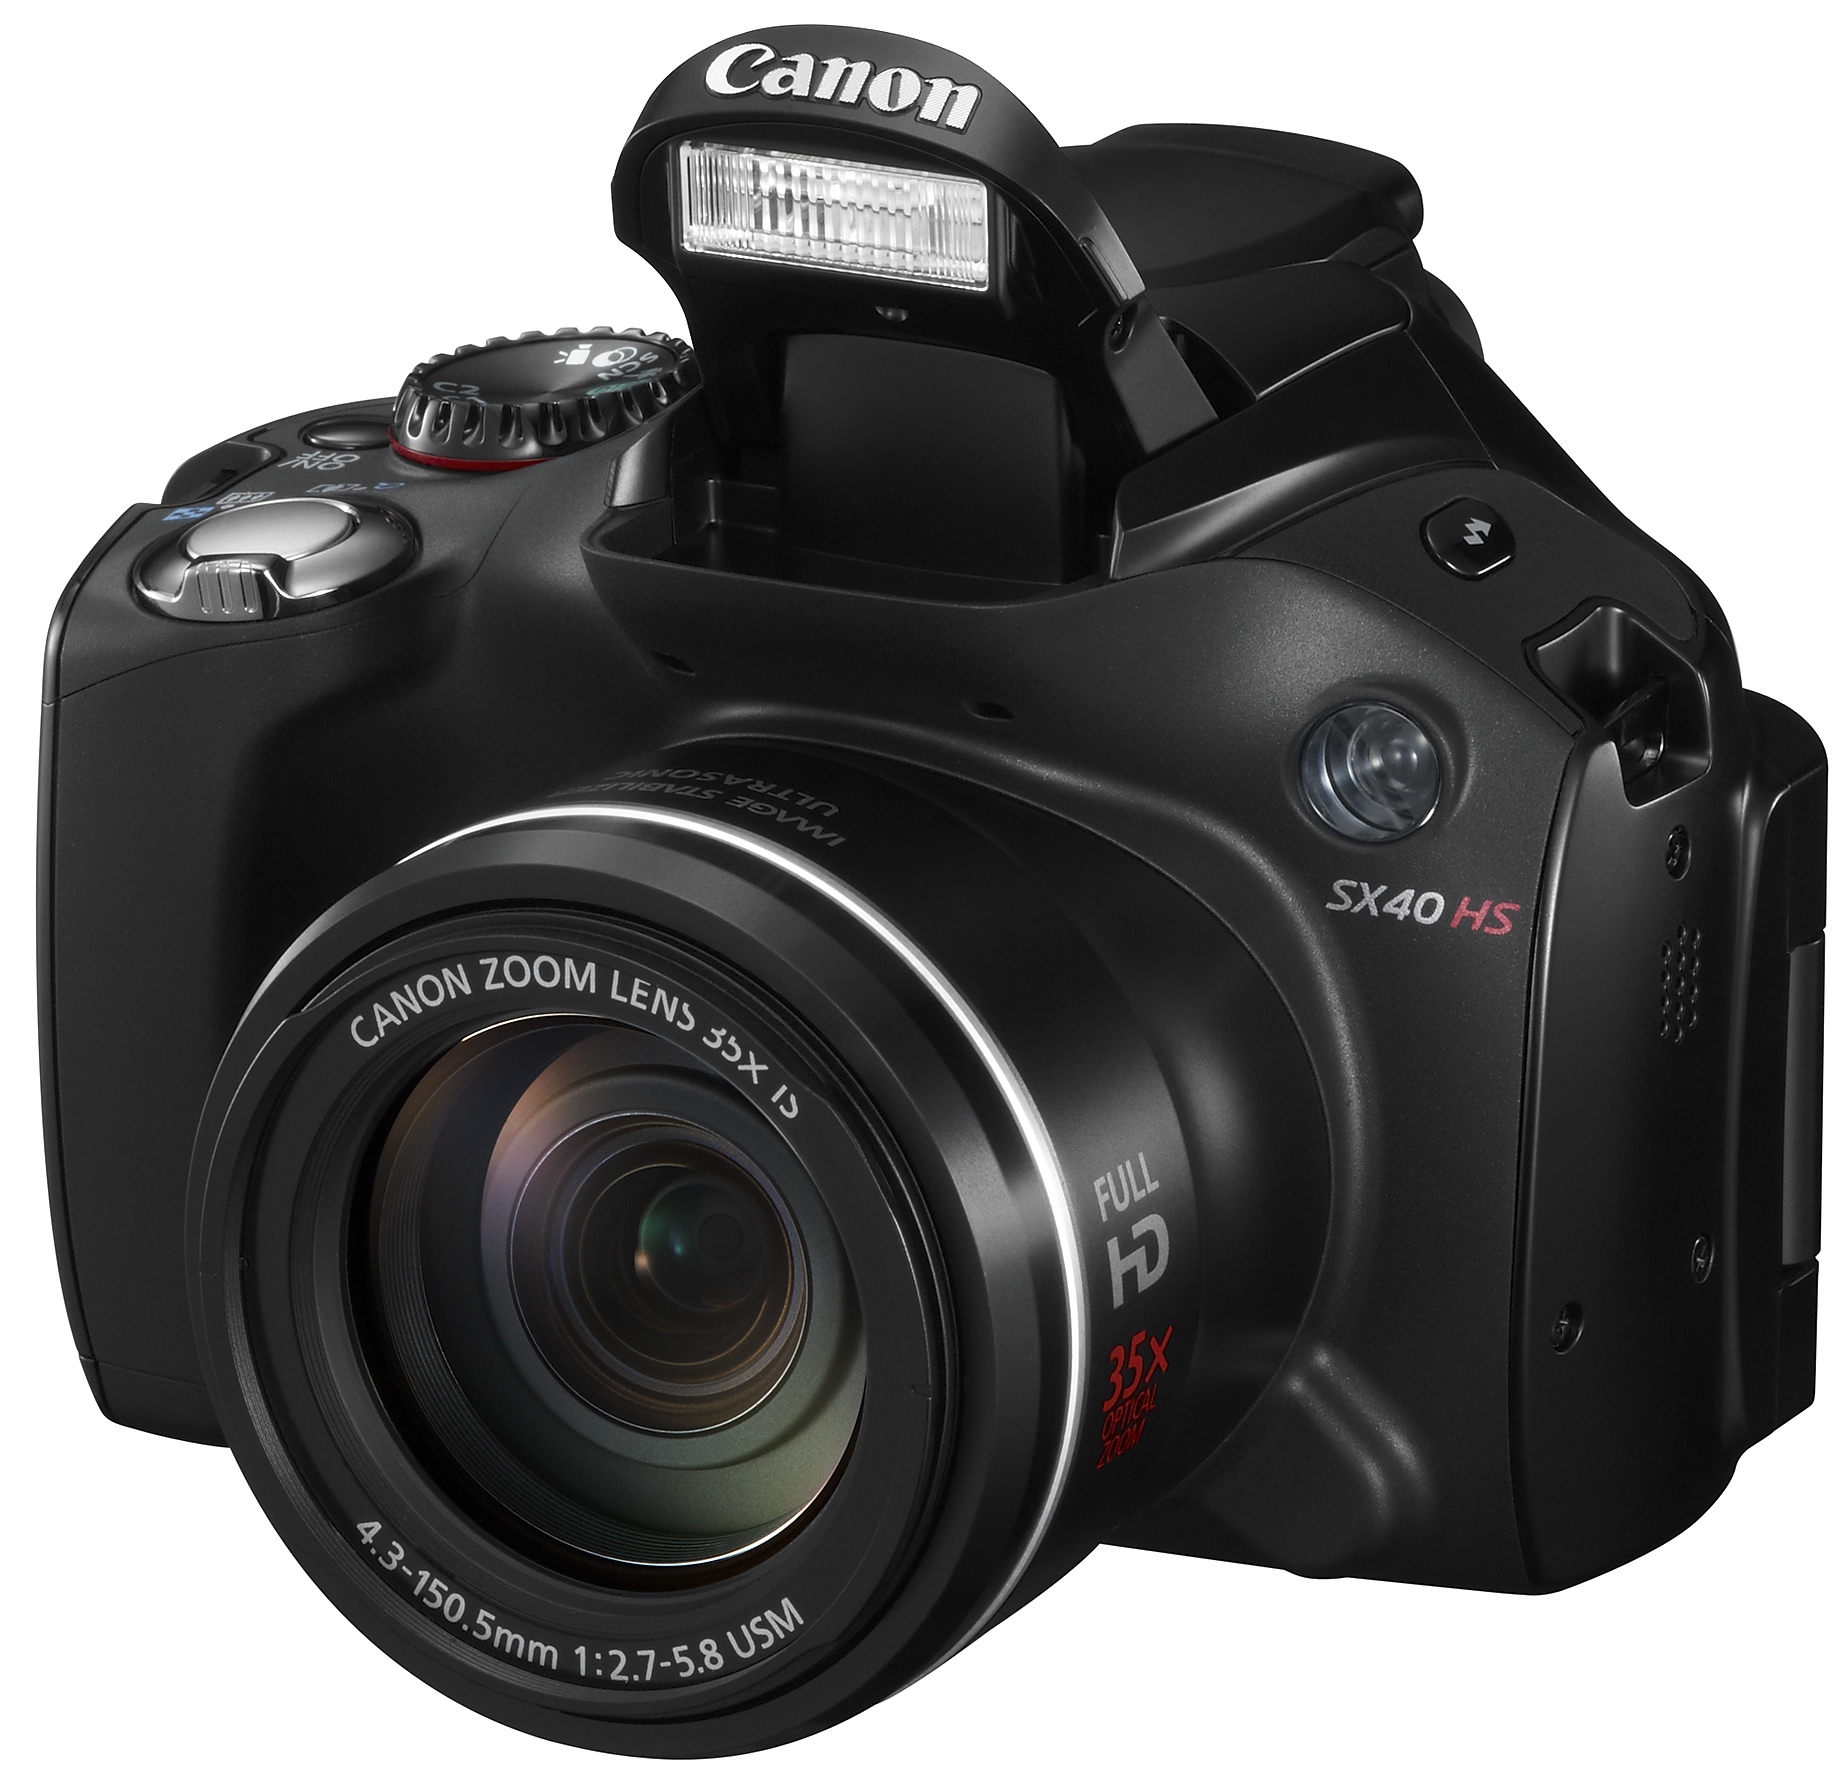 Canon SX40 HS with 8GB memory card Bag large image 1